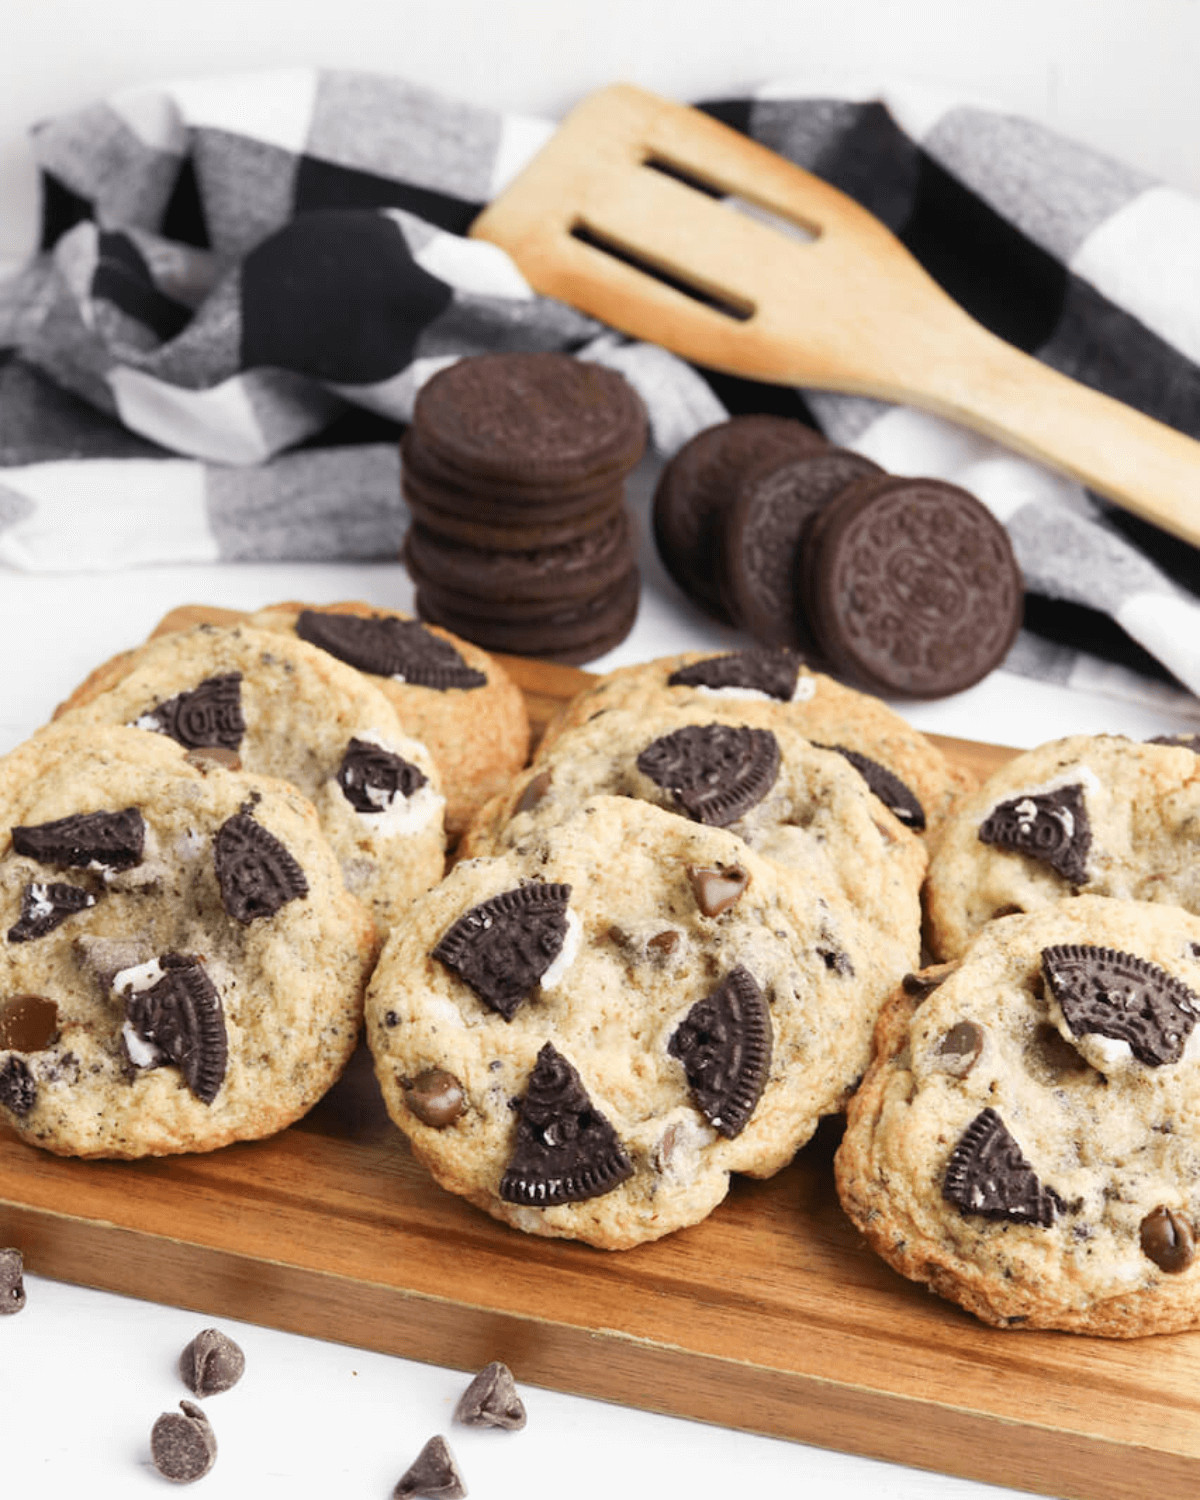 A display of the oreo chocolate chip cookies.